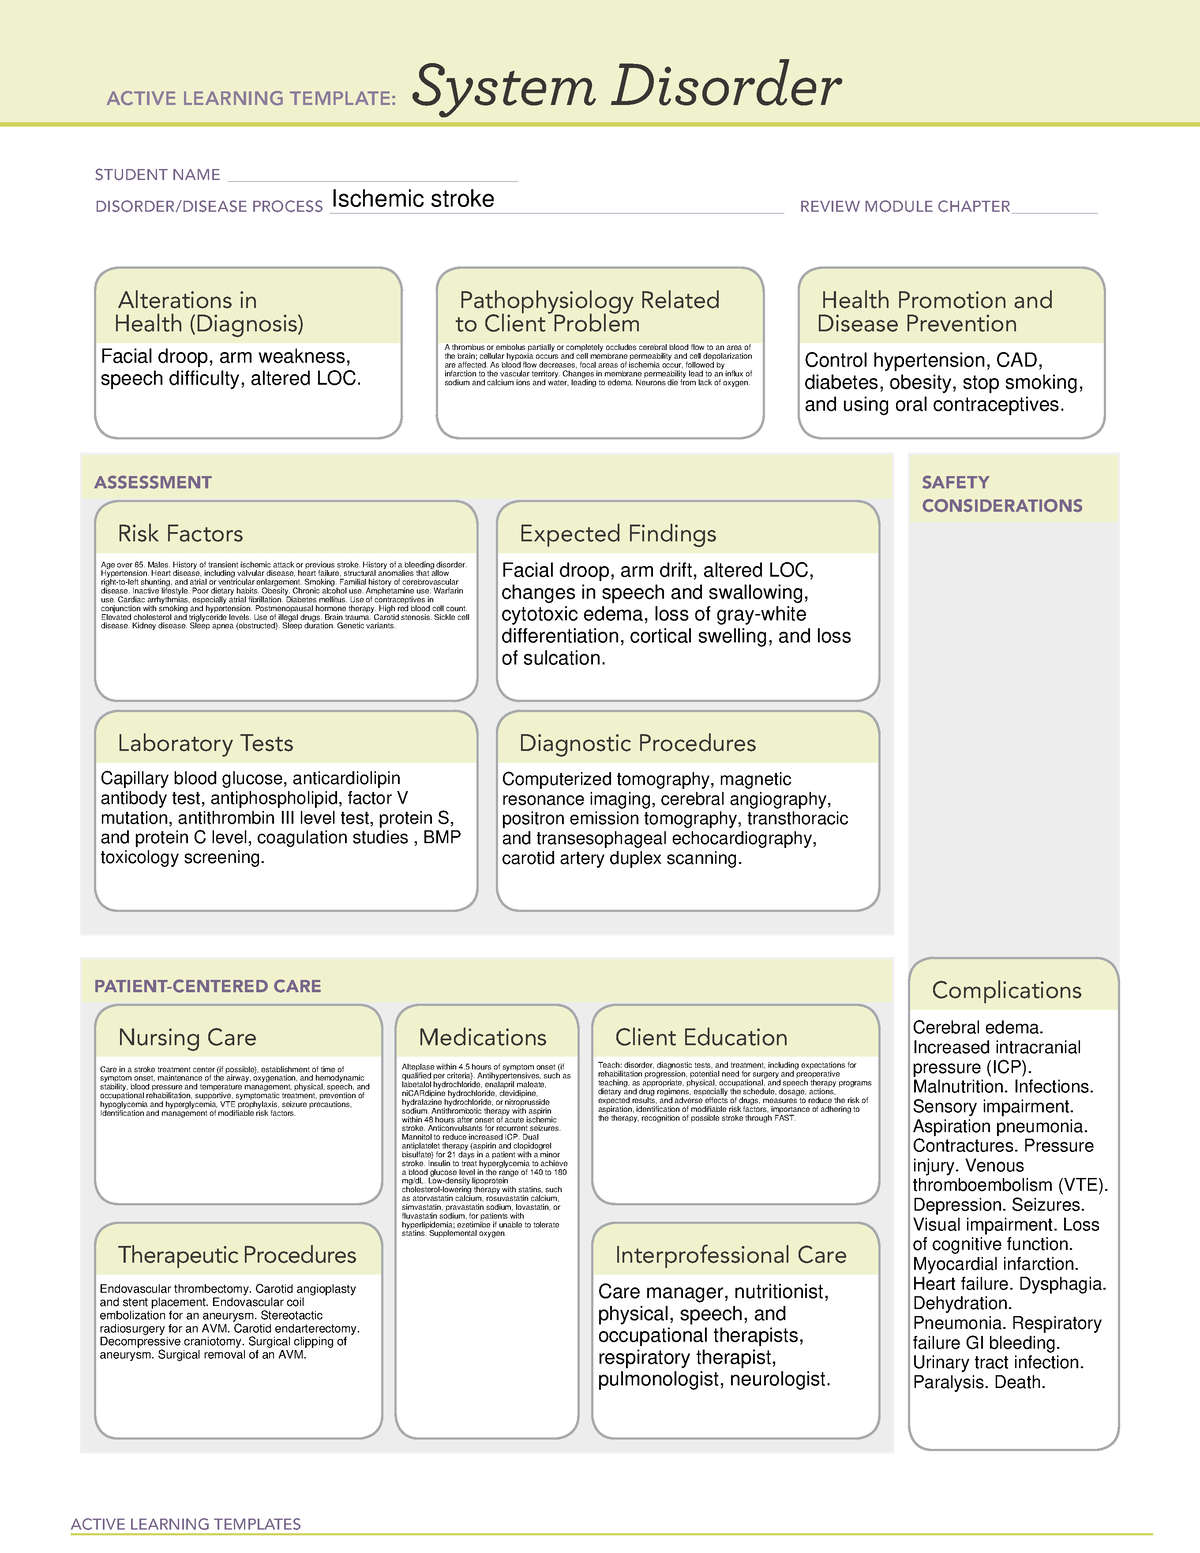 Ischemic Stroke System Disorder Template